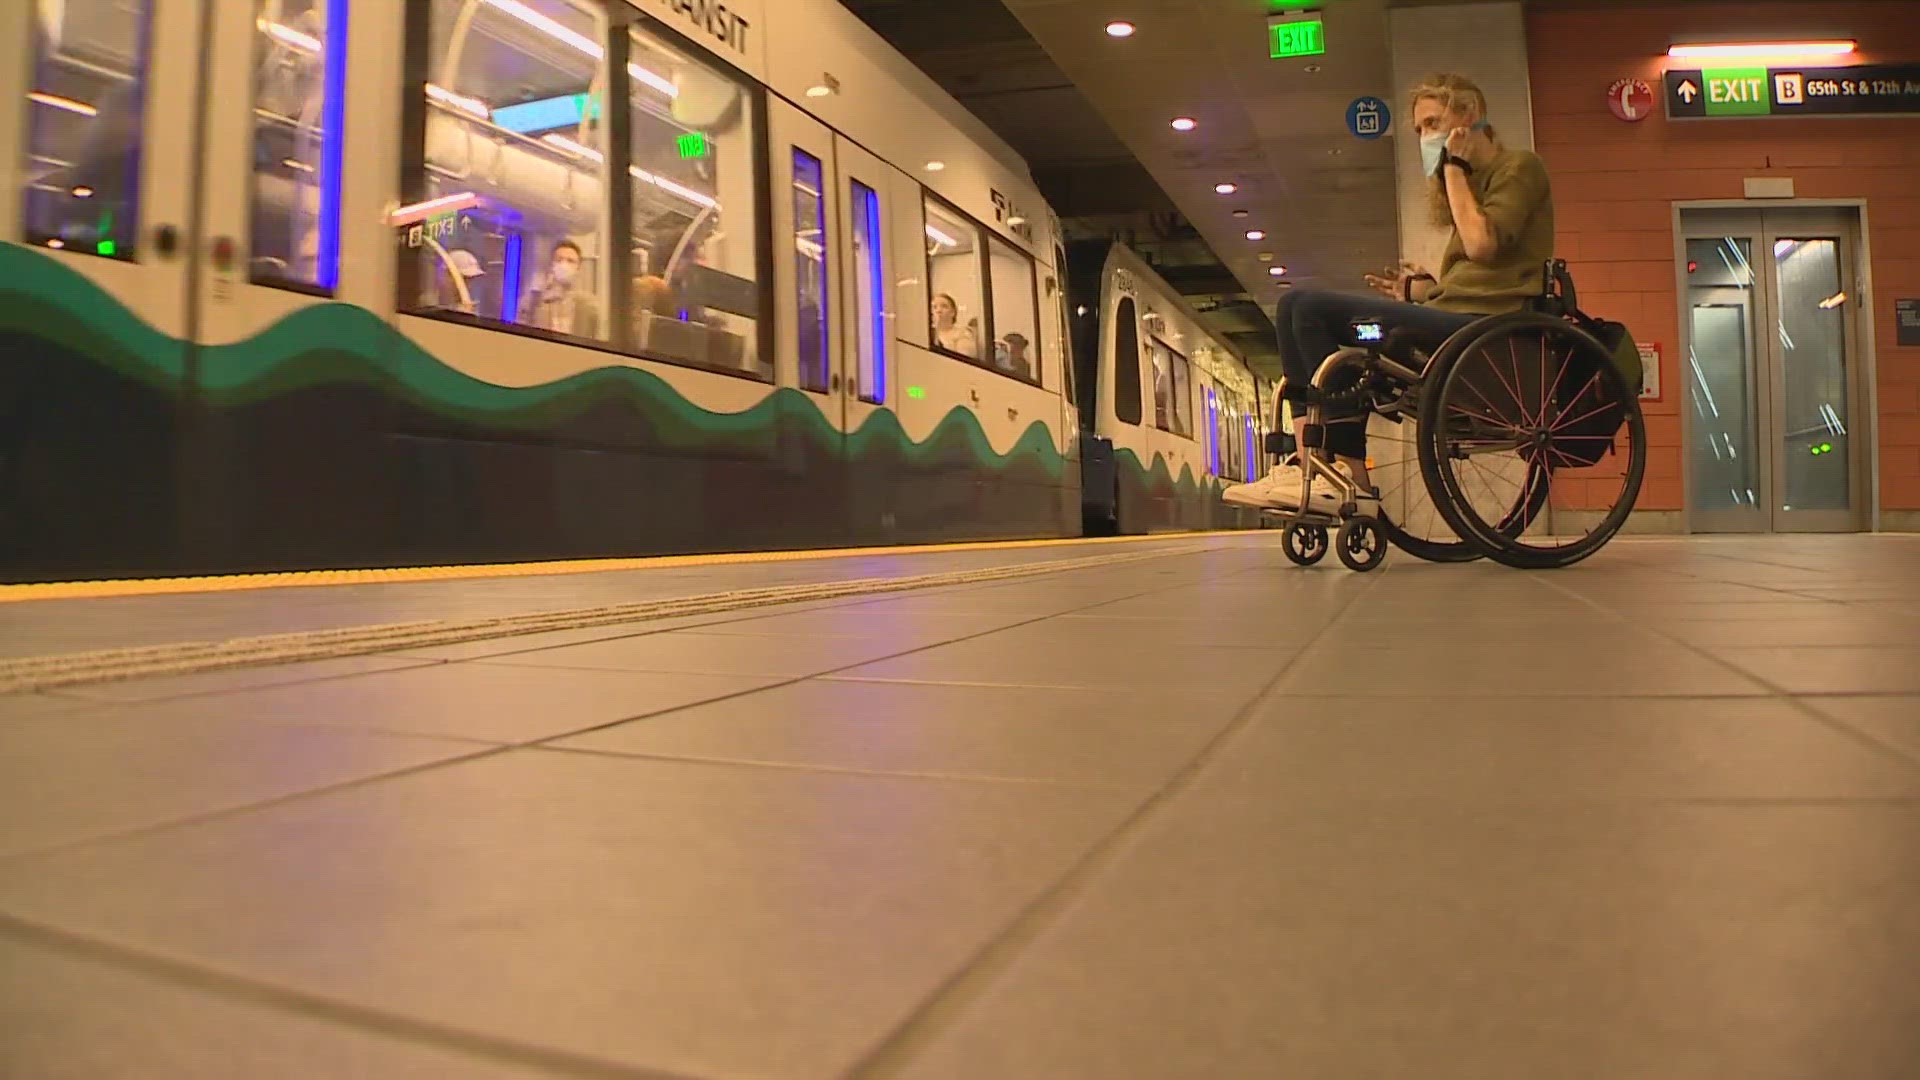 According to Disability Rights Washington, about one-third of people in this country don't drive. Problems with public transit stop them from traveling freely.